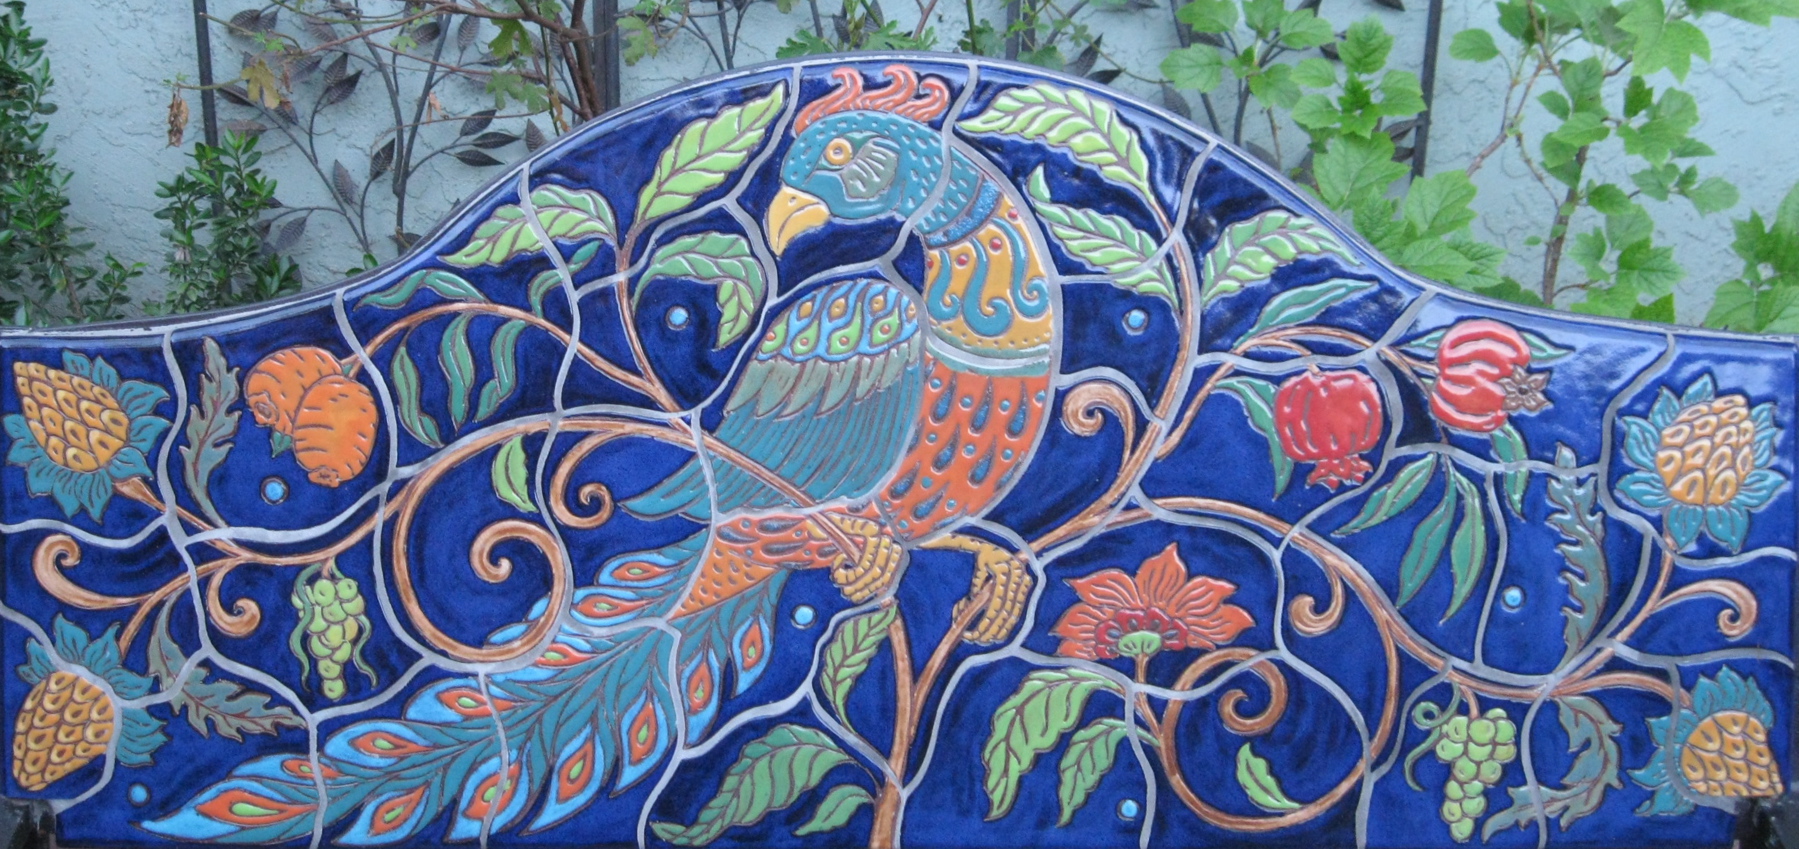 Detail of Colorful Ceramic Bench Back with Bird Design